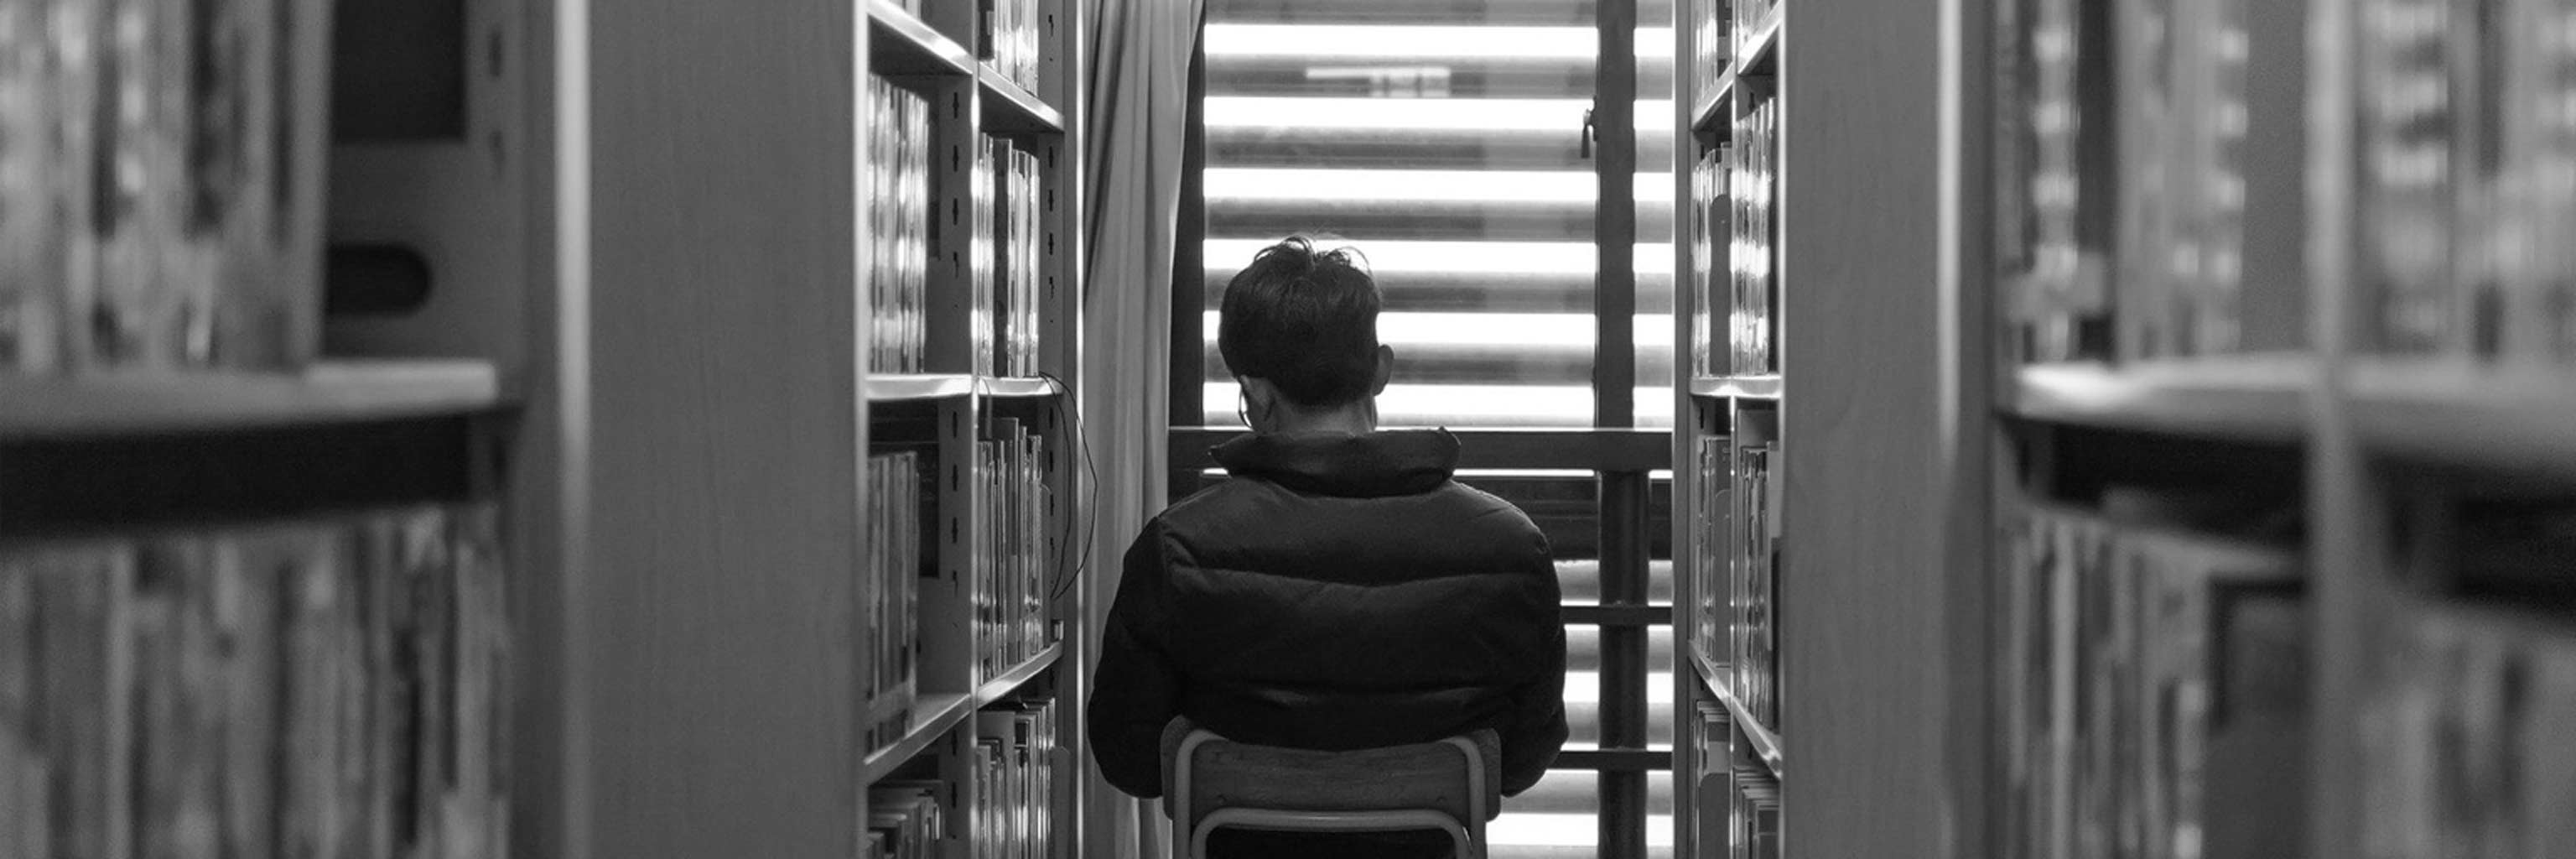 student sitting in a library row